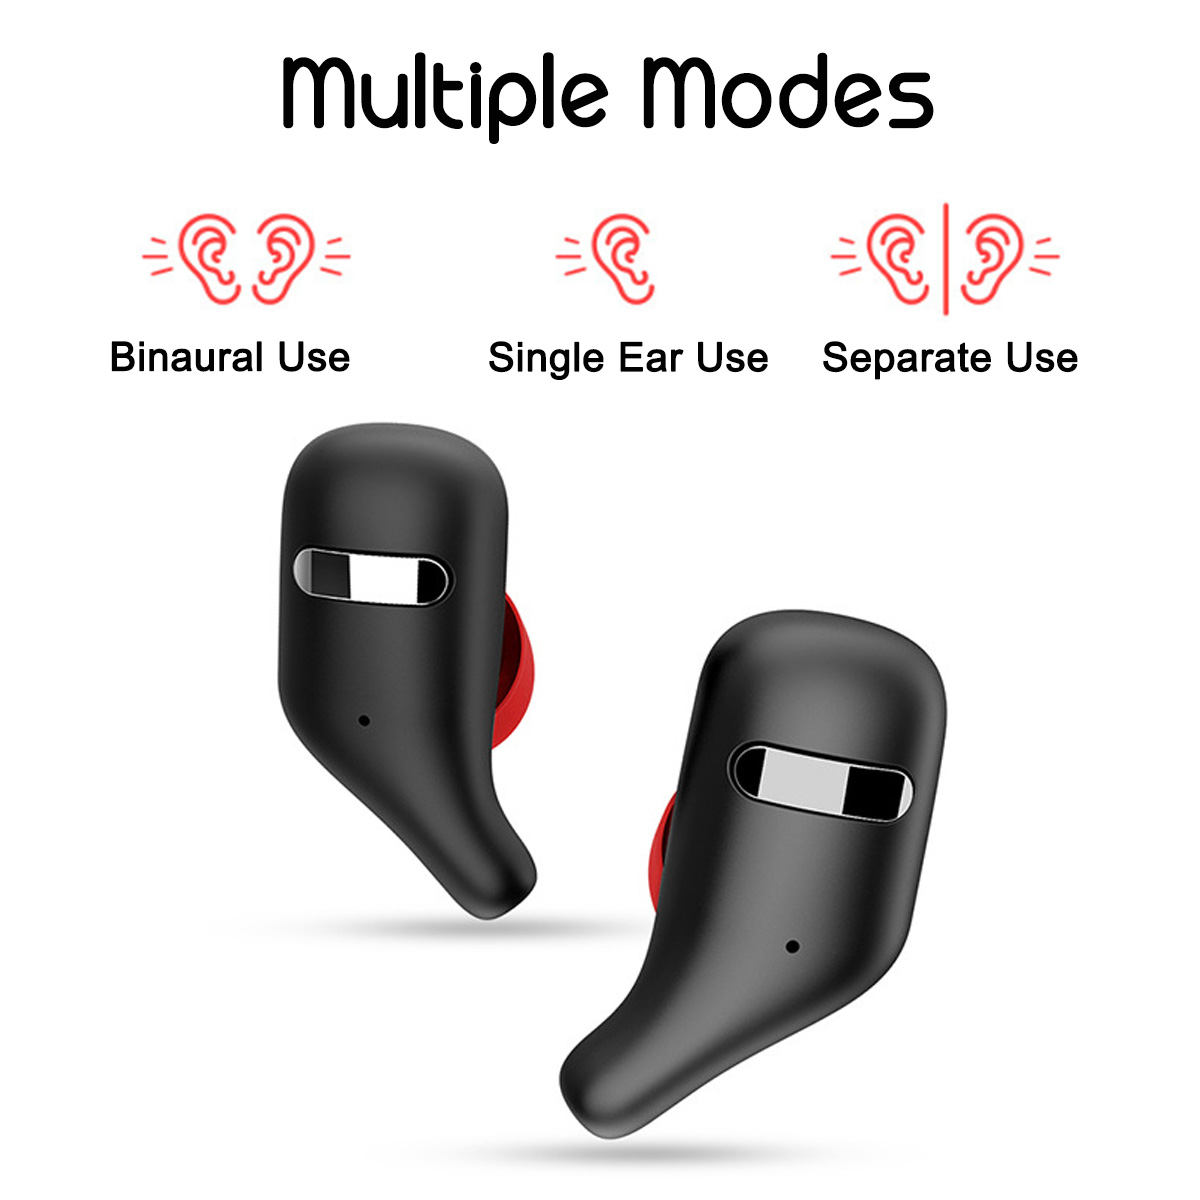 bluetooth-50-TWS-Wireless-Earphone-Bilateral-Call-Auto-Pairing-Voice-Control-Stereo-Headphone-with-C-1435523-7